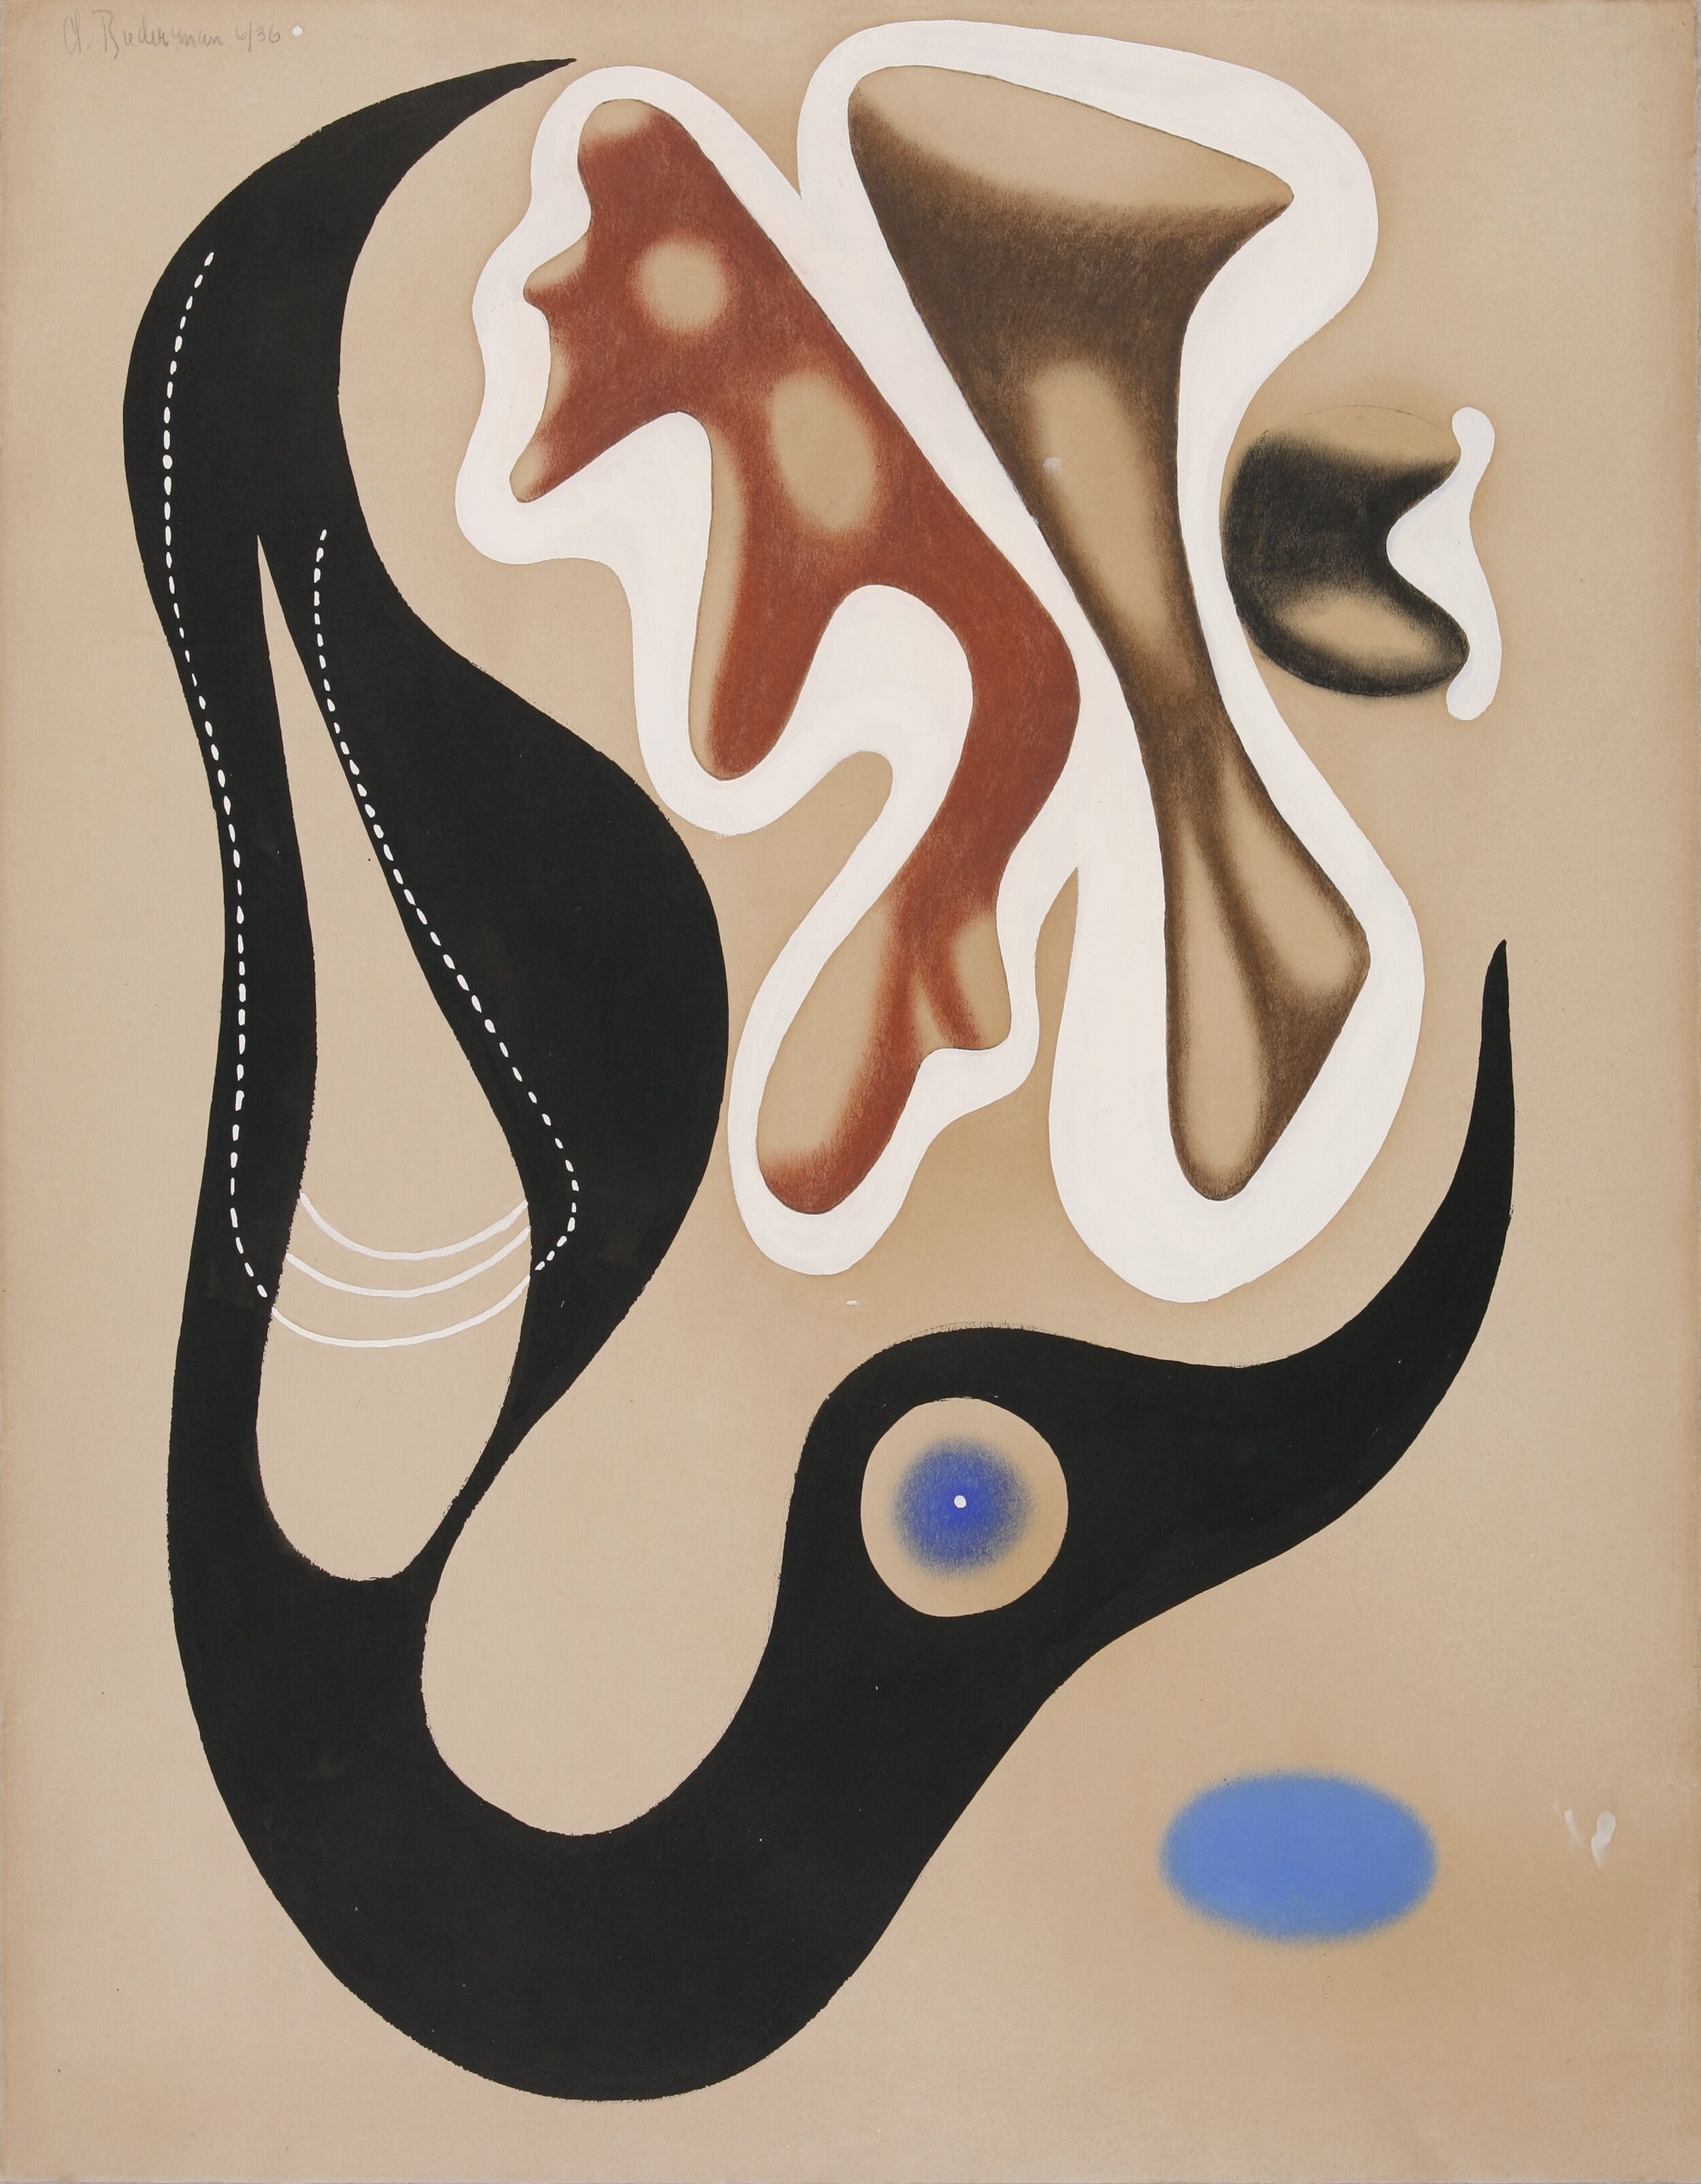 Biomorphic abstract work on paper of floating shapes in black, brown, white, and blue